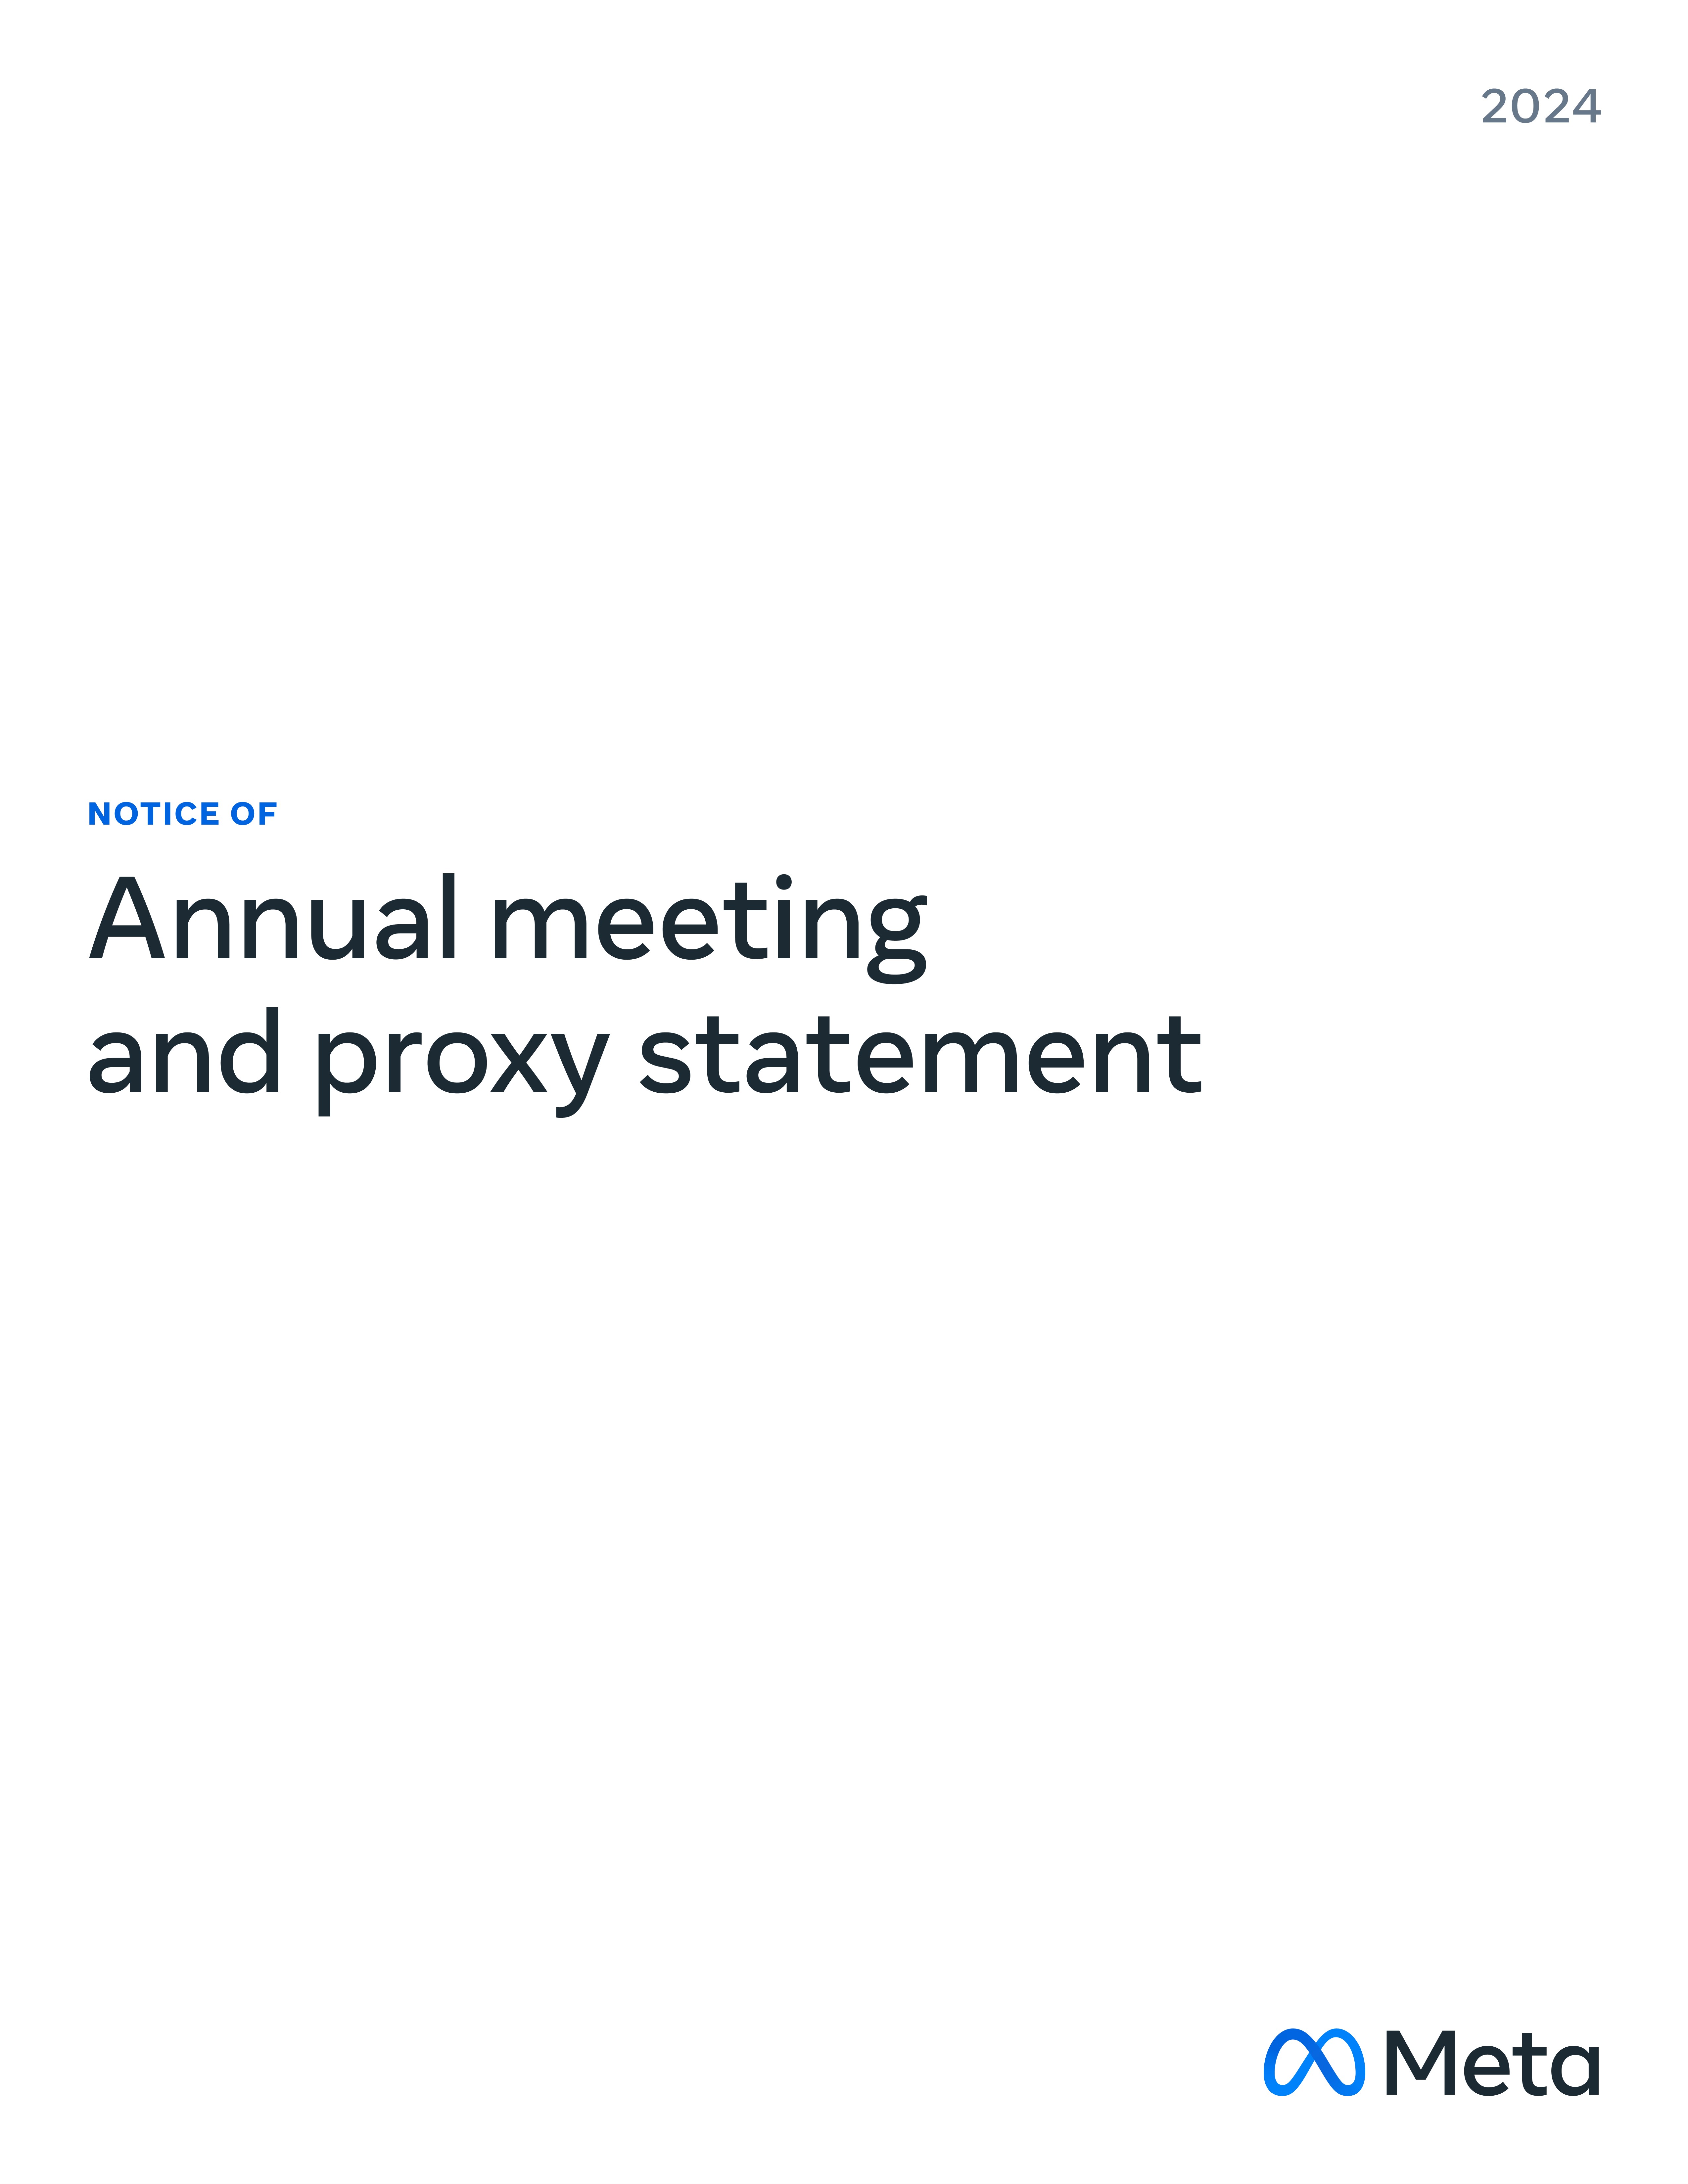 Proxy Statement_Cover Page.jpg